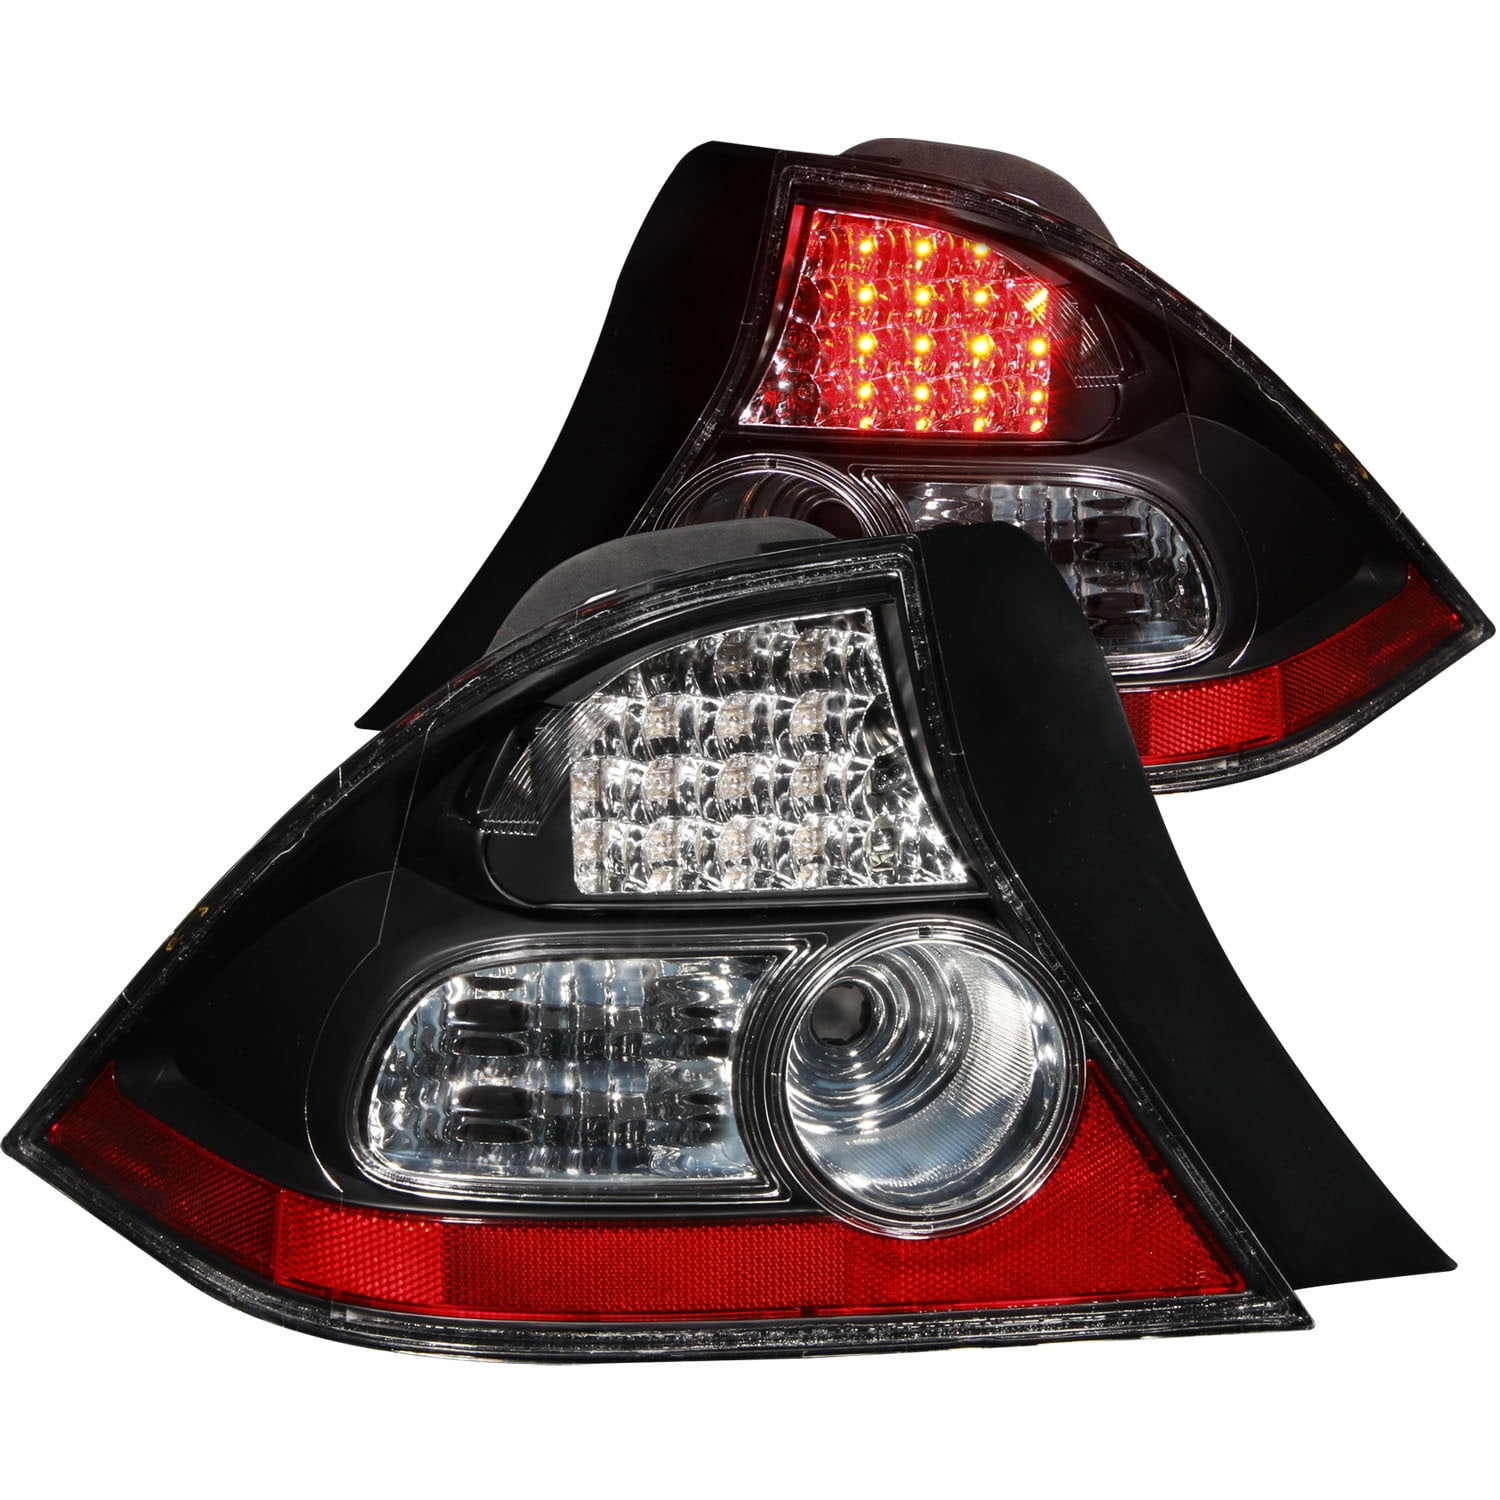 Anzo USA 321035 Tail Light Assembly 04 05 Civic LED Red Reflector Pair